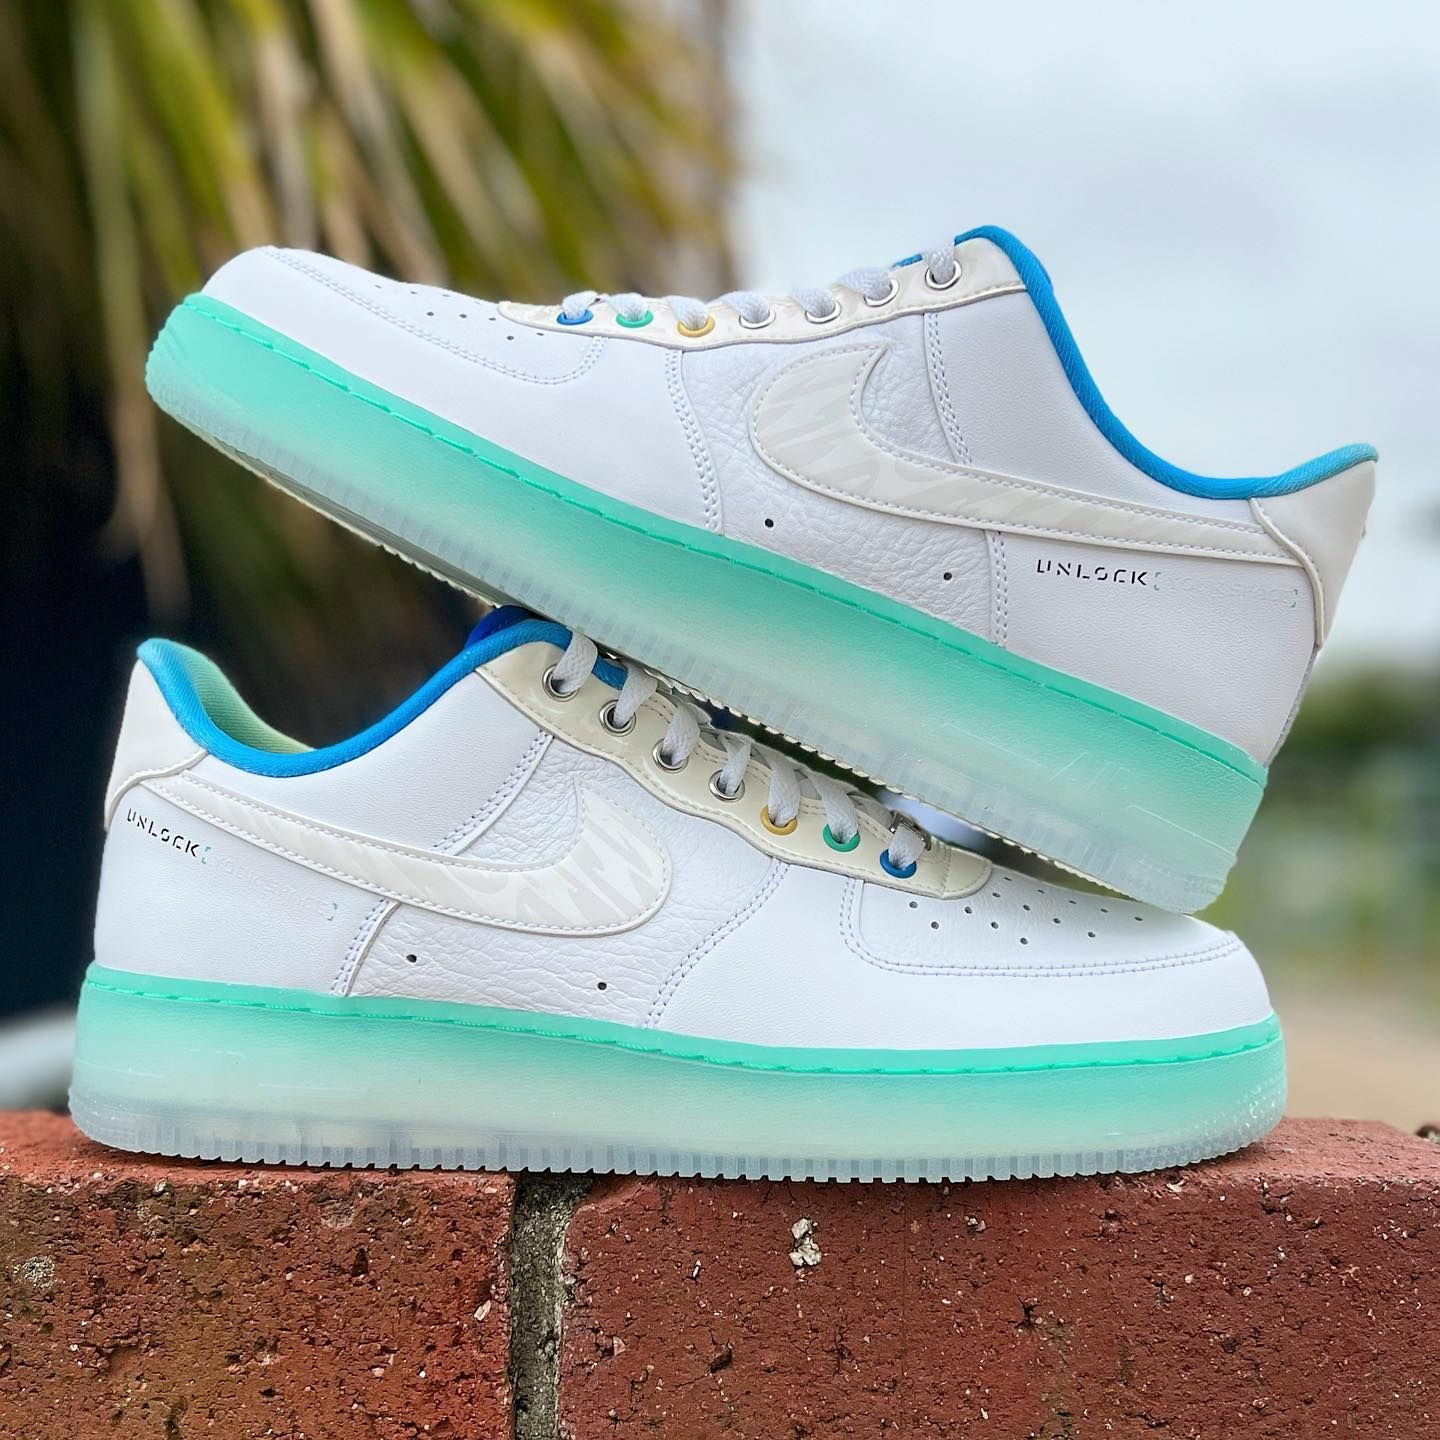 NIKE AIR FORCE 1 LOW 'UNLOCK YOUR SPACE' ナイキ エア フォースワン